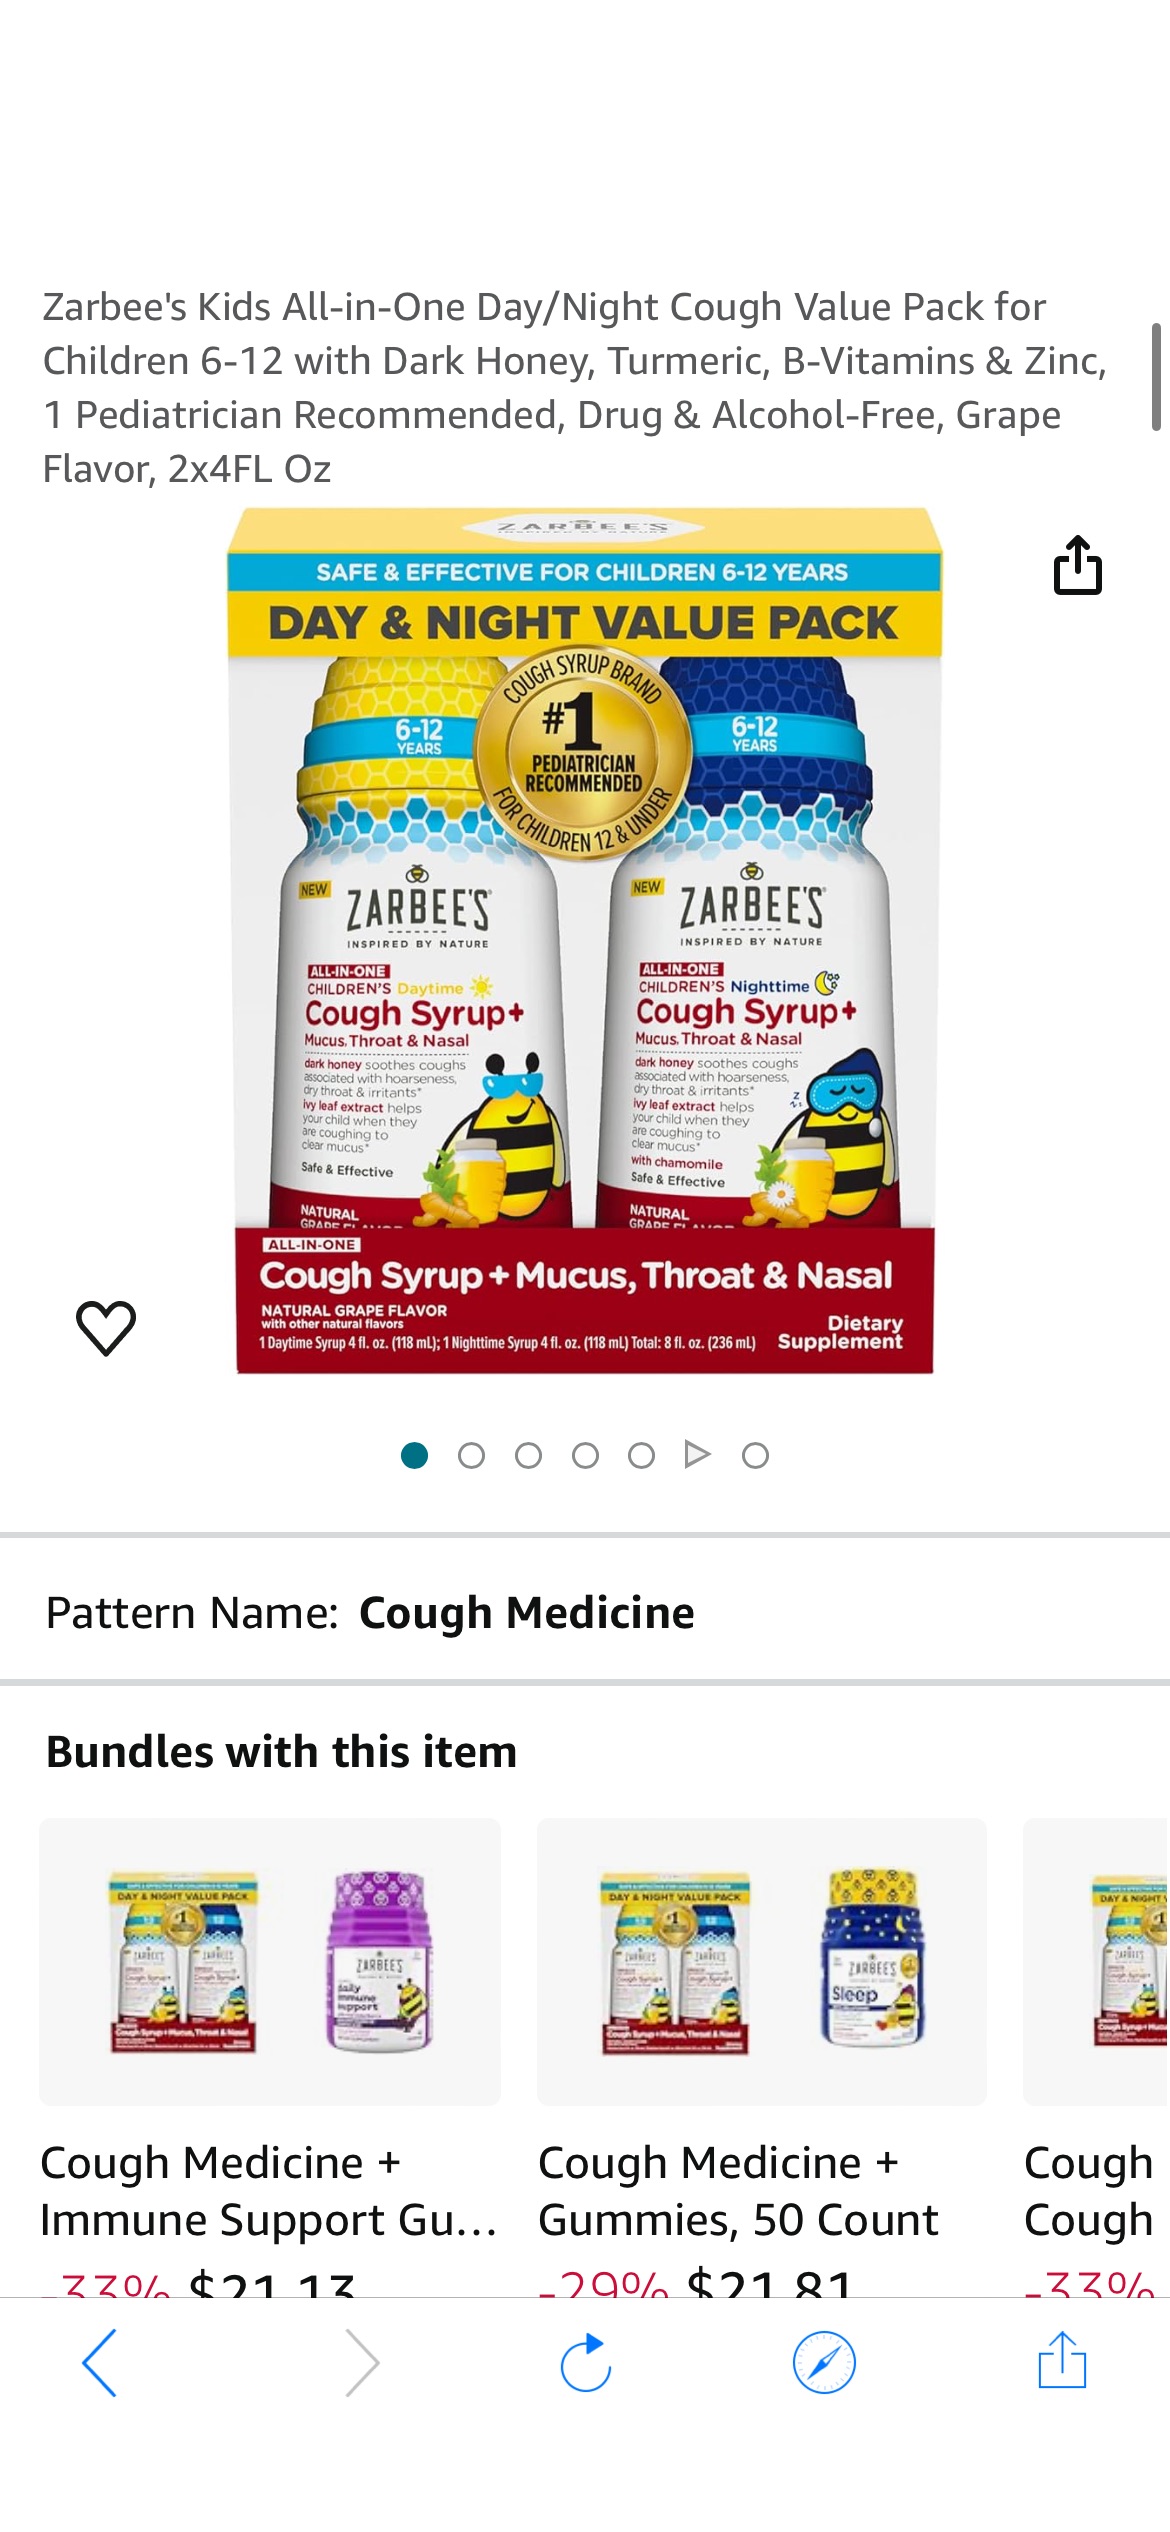 Amazon.com: Zarbee's Kids All-in-One Day/Night Cough Value Pack for Children 6-12 with Dark Honey, Turmeric, B-Vitamins & Zinc, 1 Pediatrician Recommended, Drug & Alcohol-Free, Grape Flavor, 2x4FL Oz 